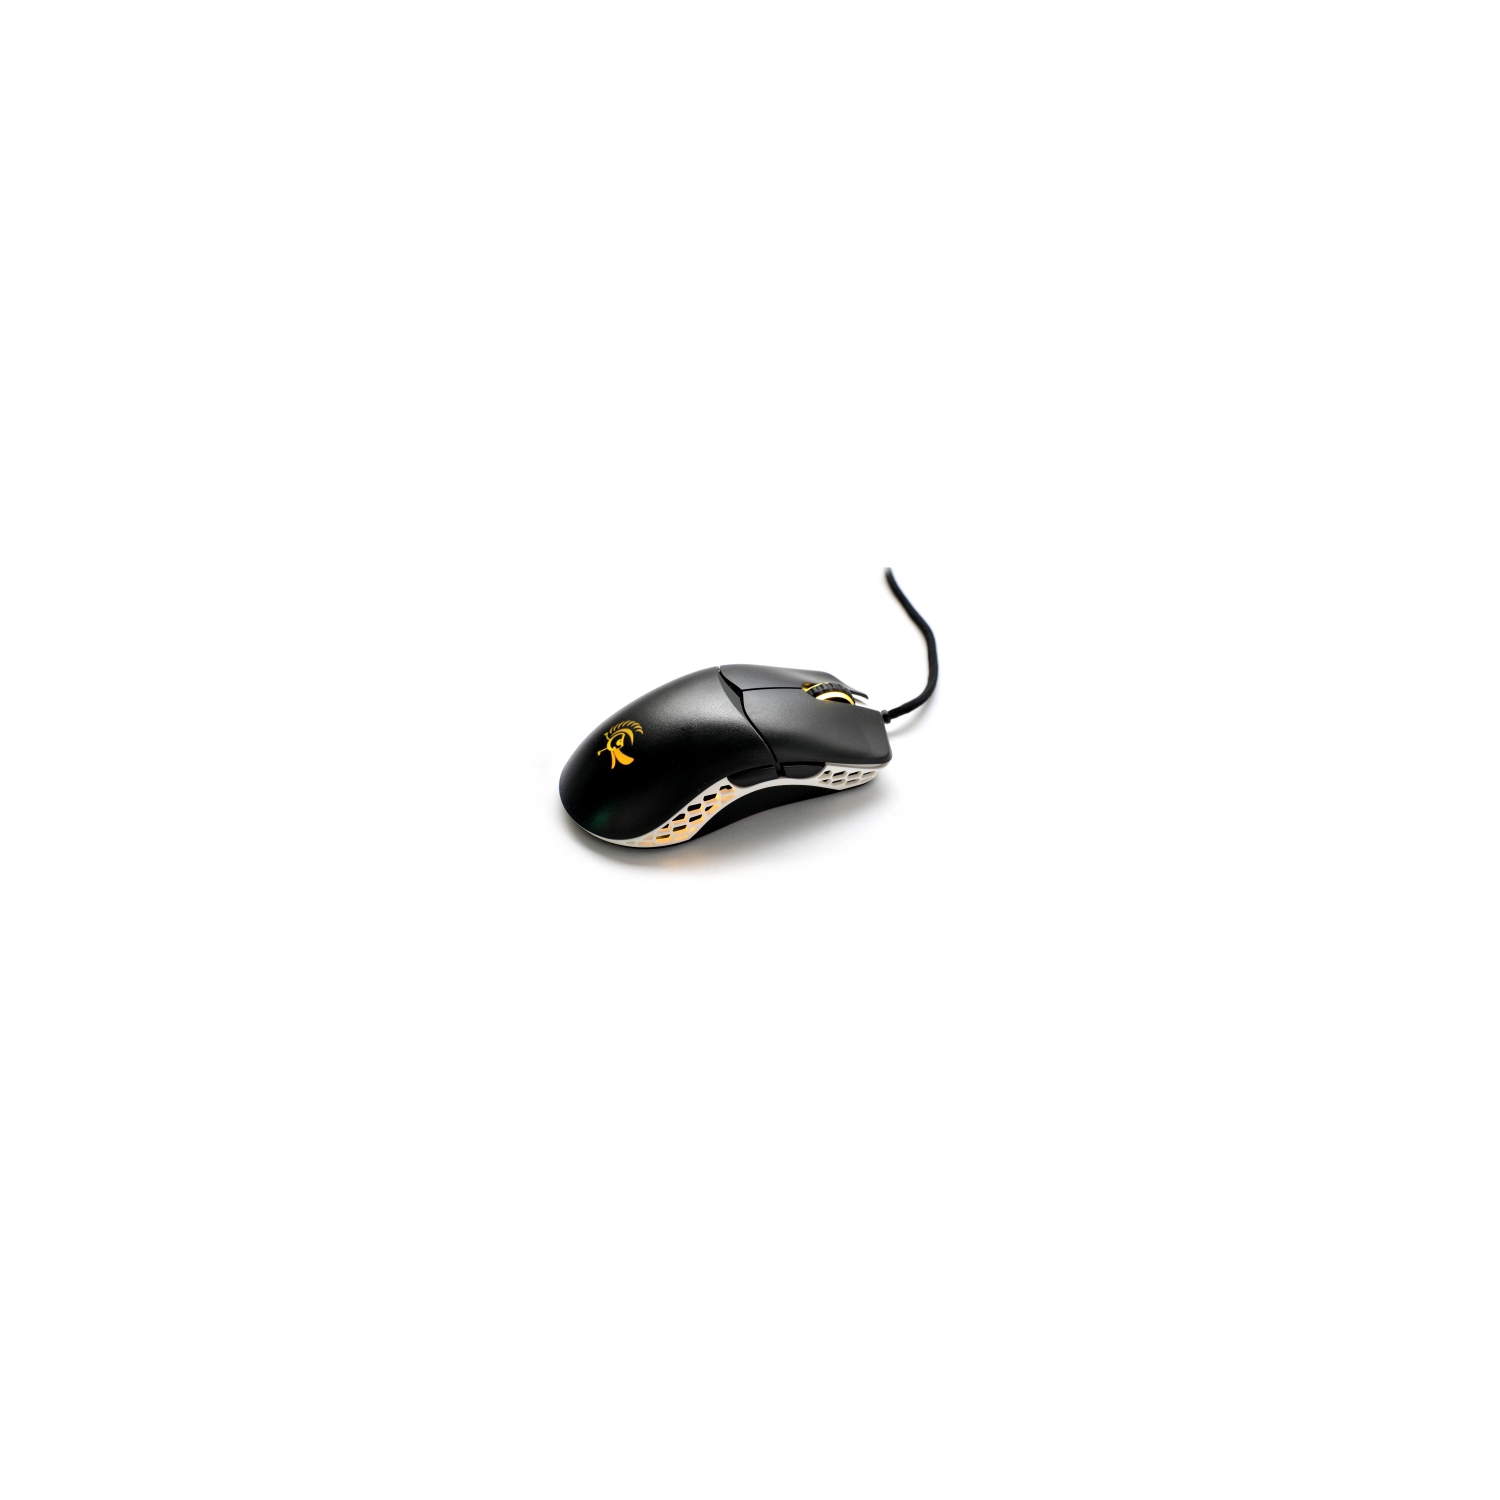 Ducky Feather Black & White Gaming Mouse - Ambidextrous - Omron